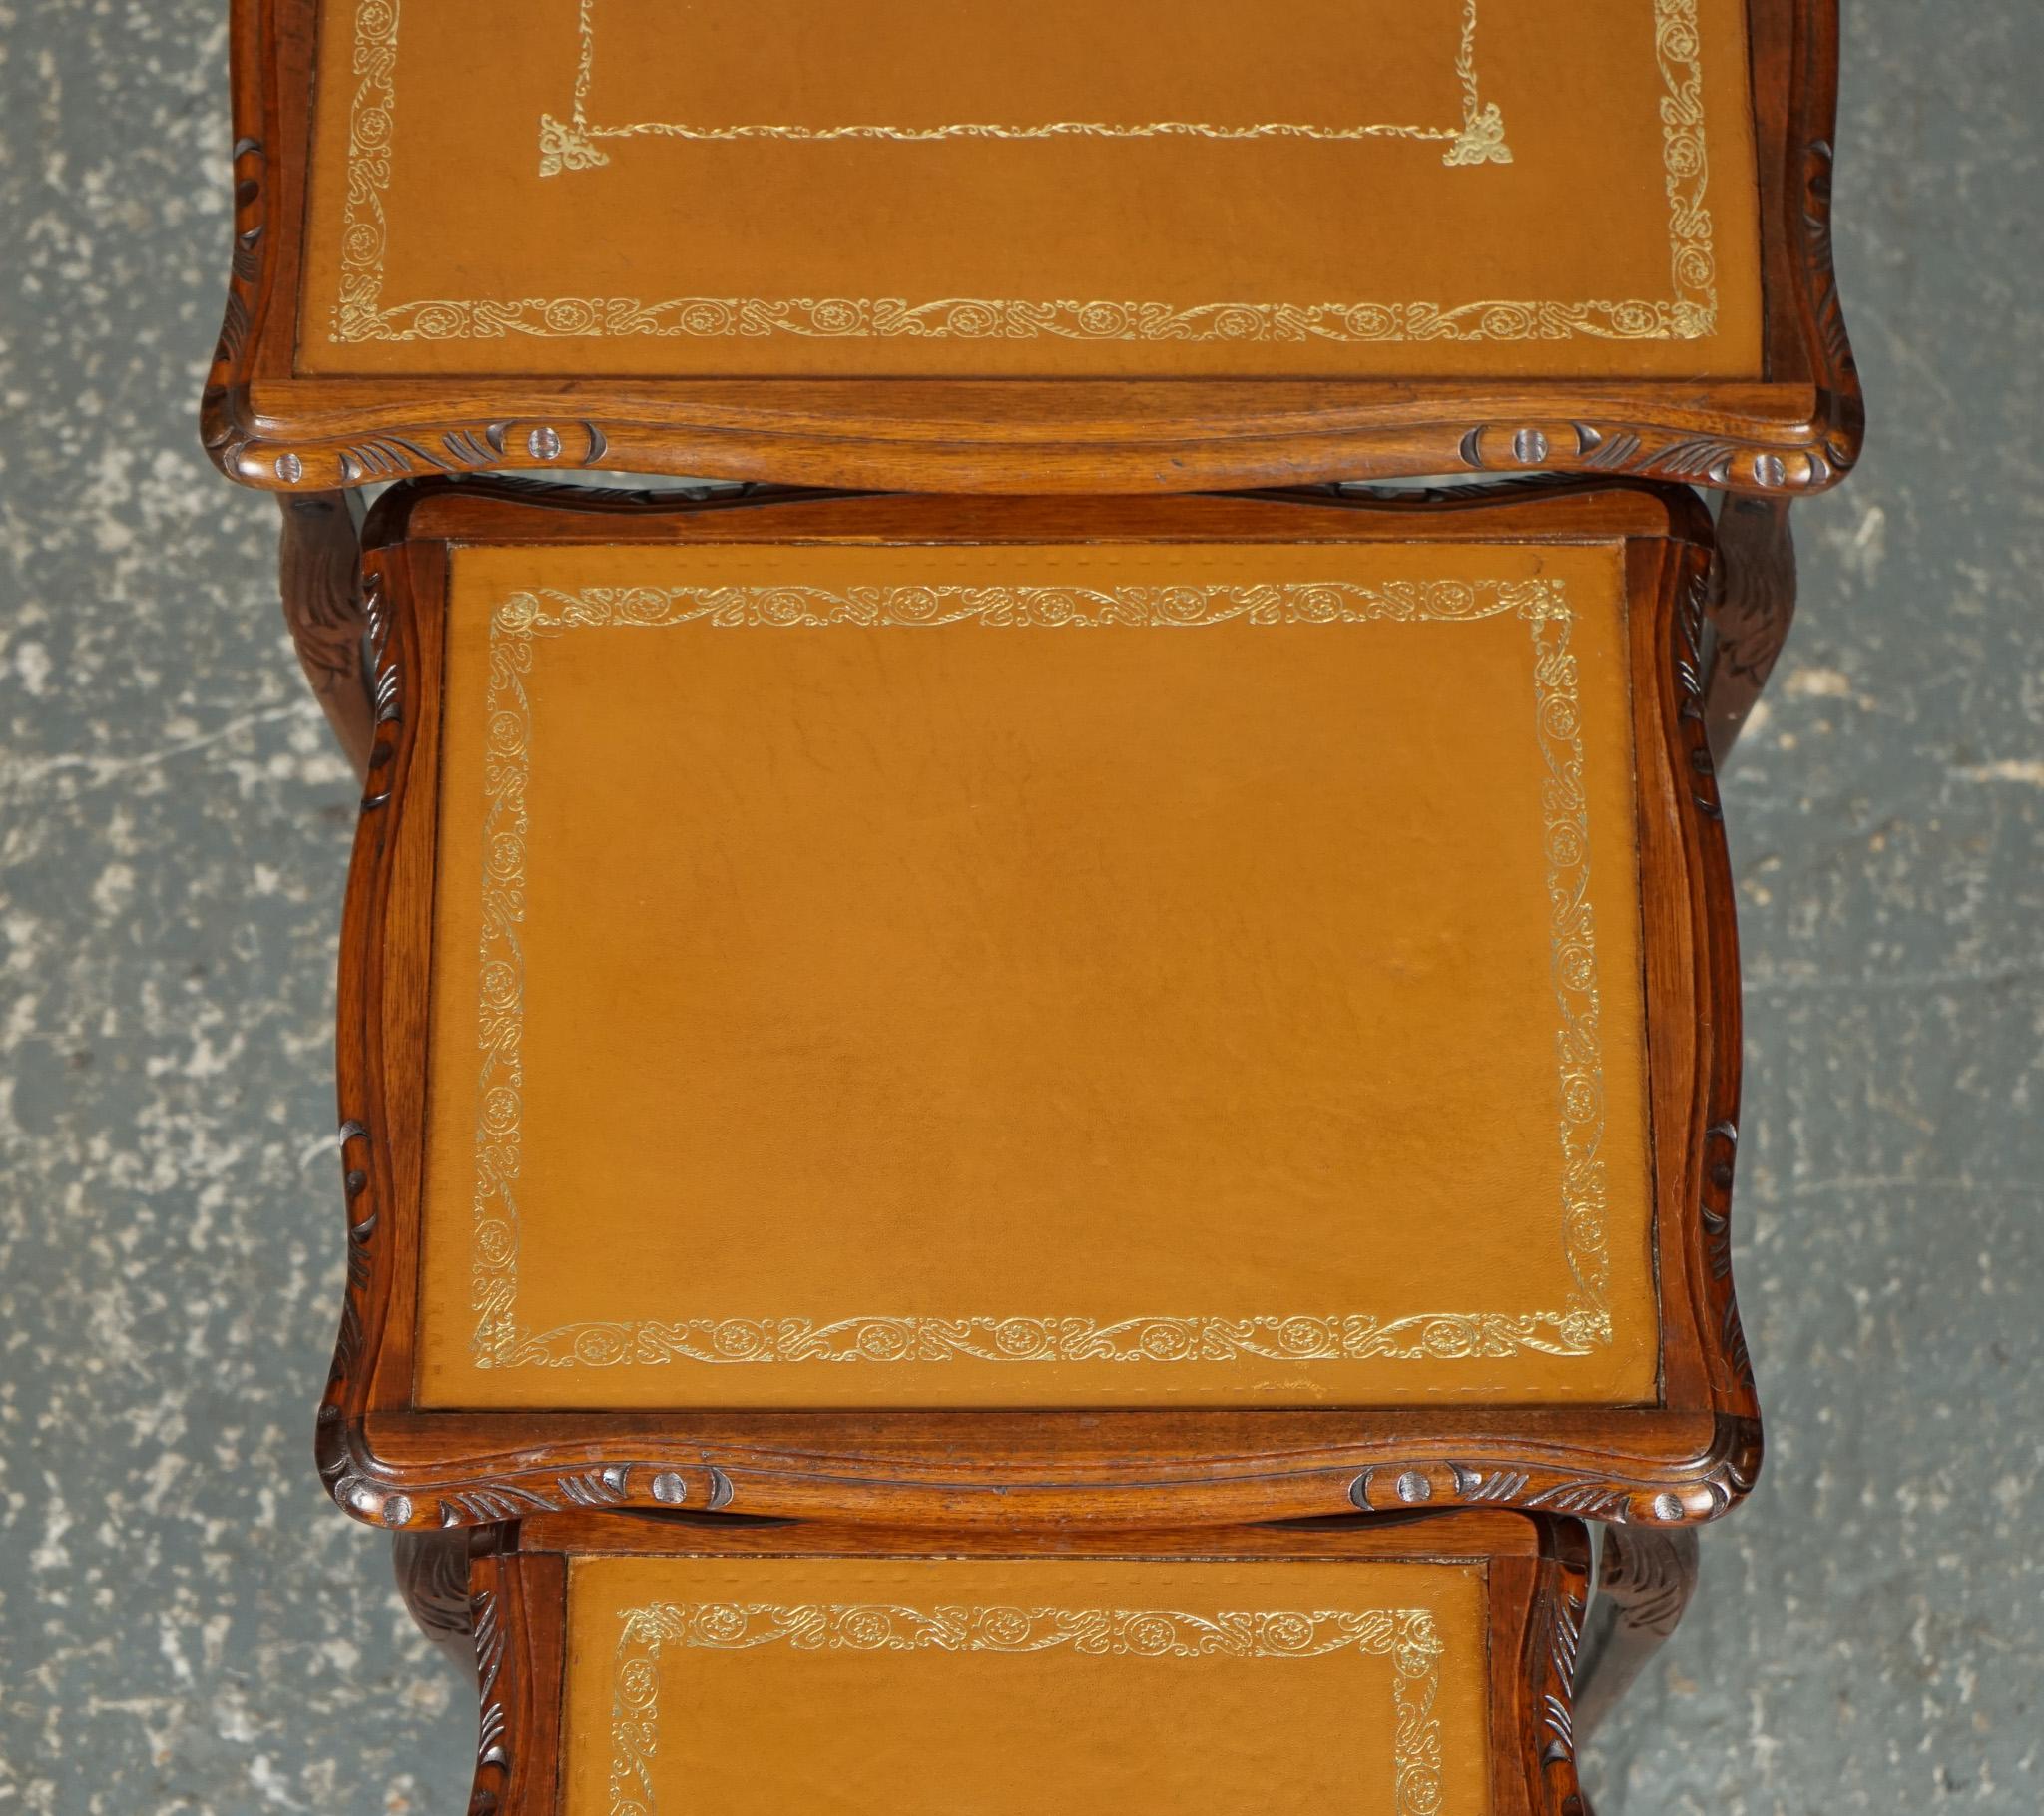 VINTAGE NEST OF TABLES QUEEN ANNE STYLE LEGS WiTH BROWN EMBOSSED LEATHER TOP J1 For Sale 5